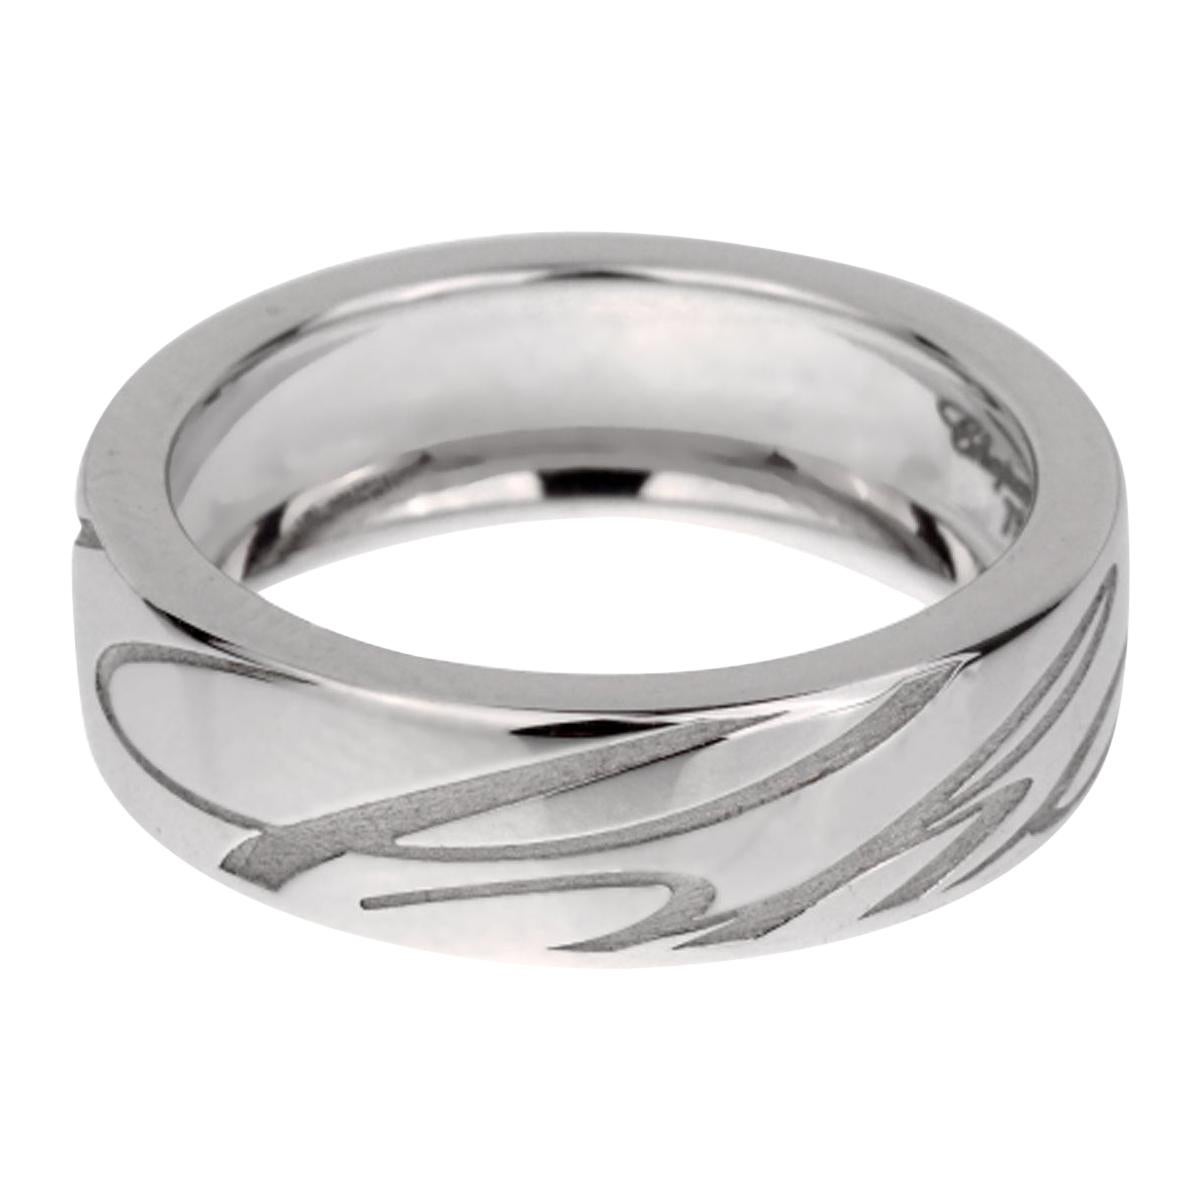 Chopard Chopardissimo White Gold Band Ring